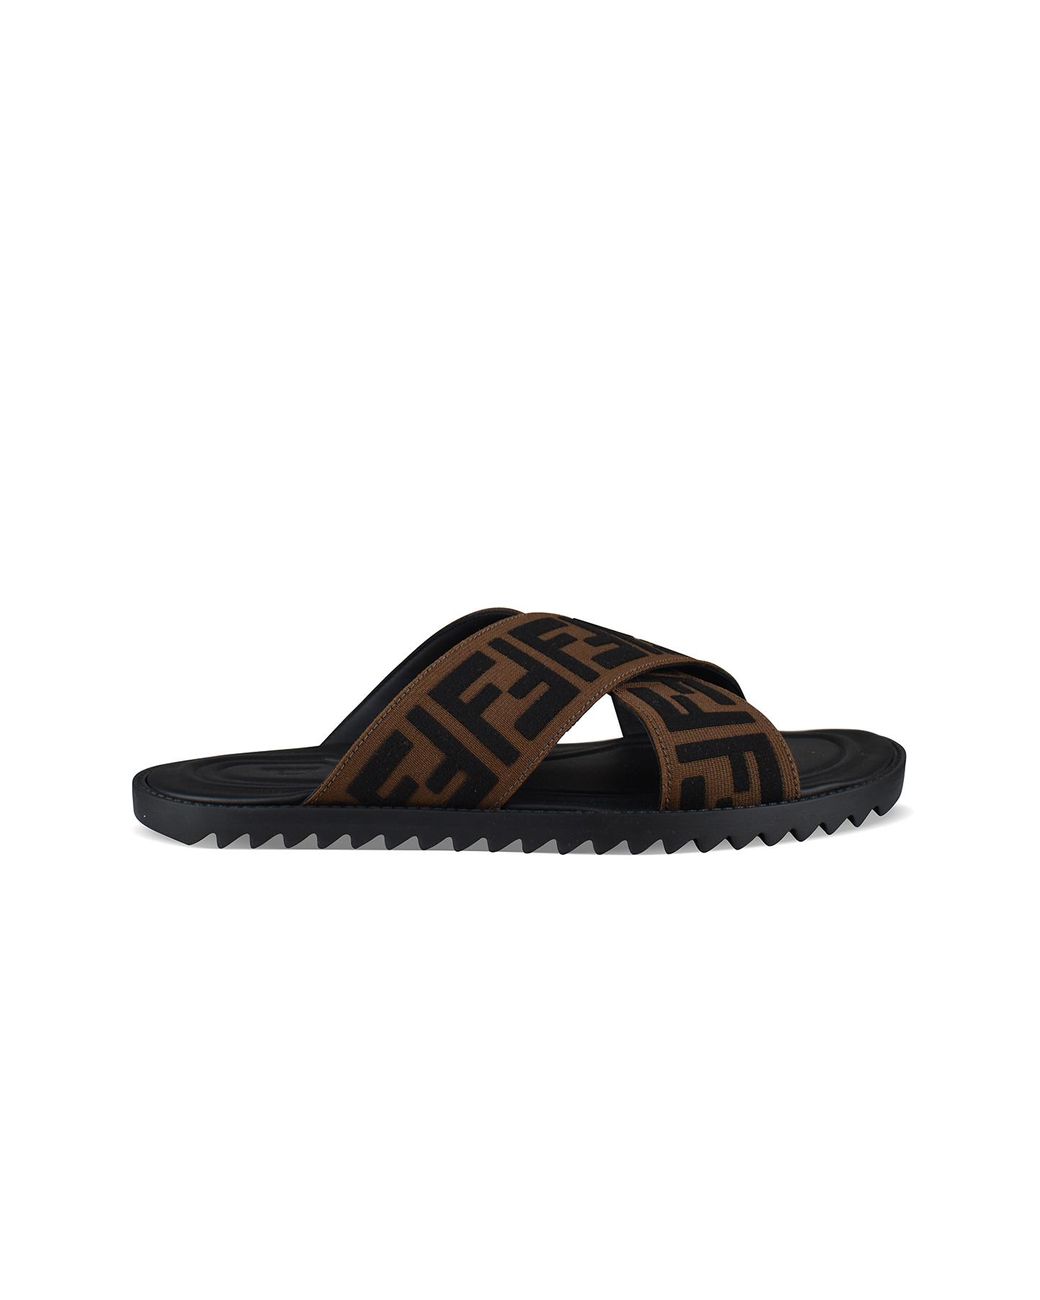 New FENDI girls SANDALS size: 1 (6-10 yr olds) - clothing & accessories -  by owner - craigslist